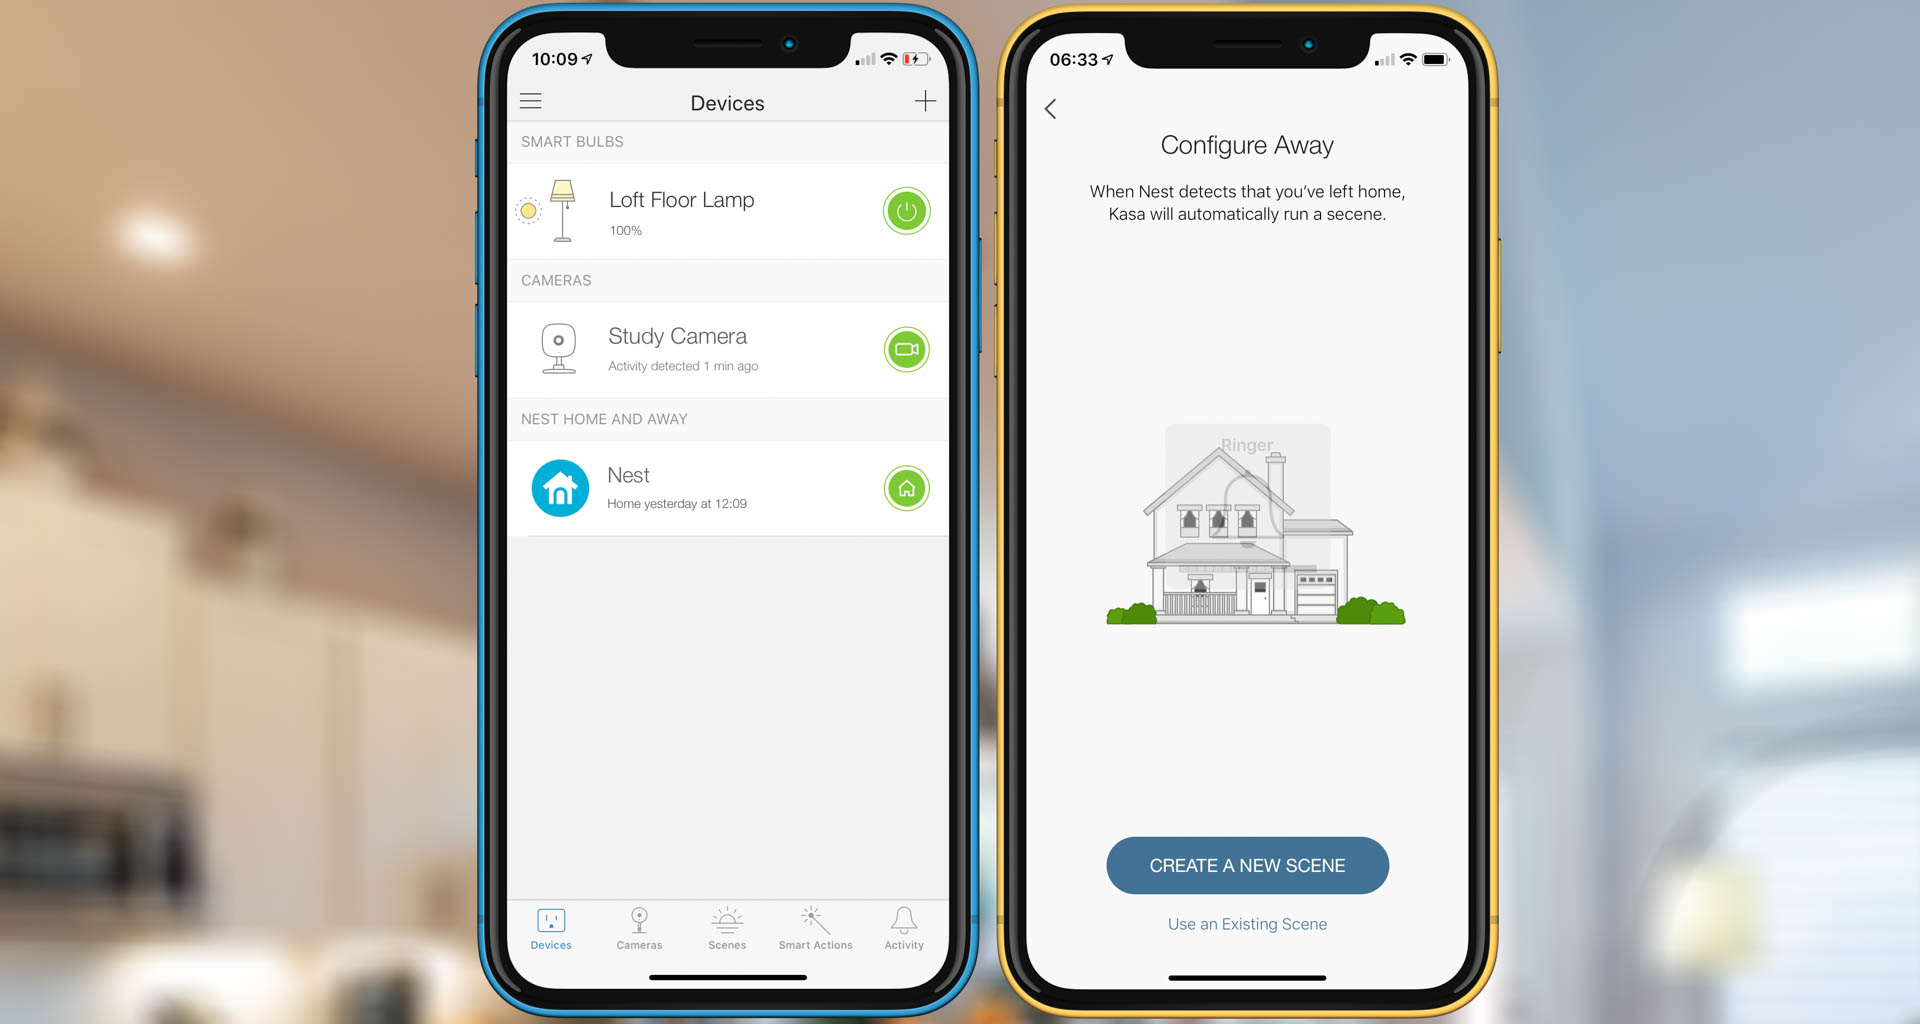 The Kasa Smart app has been updated effective with version 2.15 to remove all Works with Nest functionality. If you stick with a prior version as shown here (2.14.0), these connections still work. Image: Digitized House.